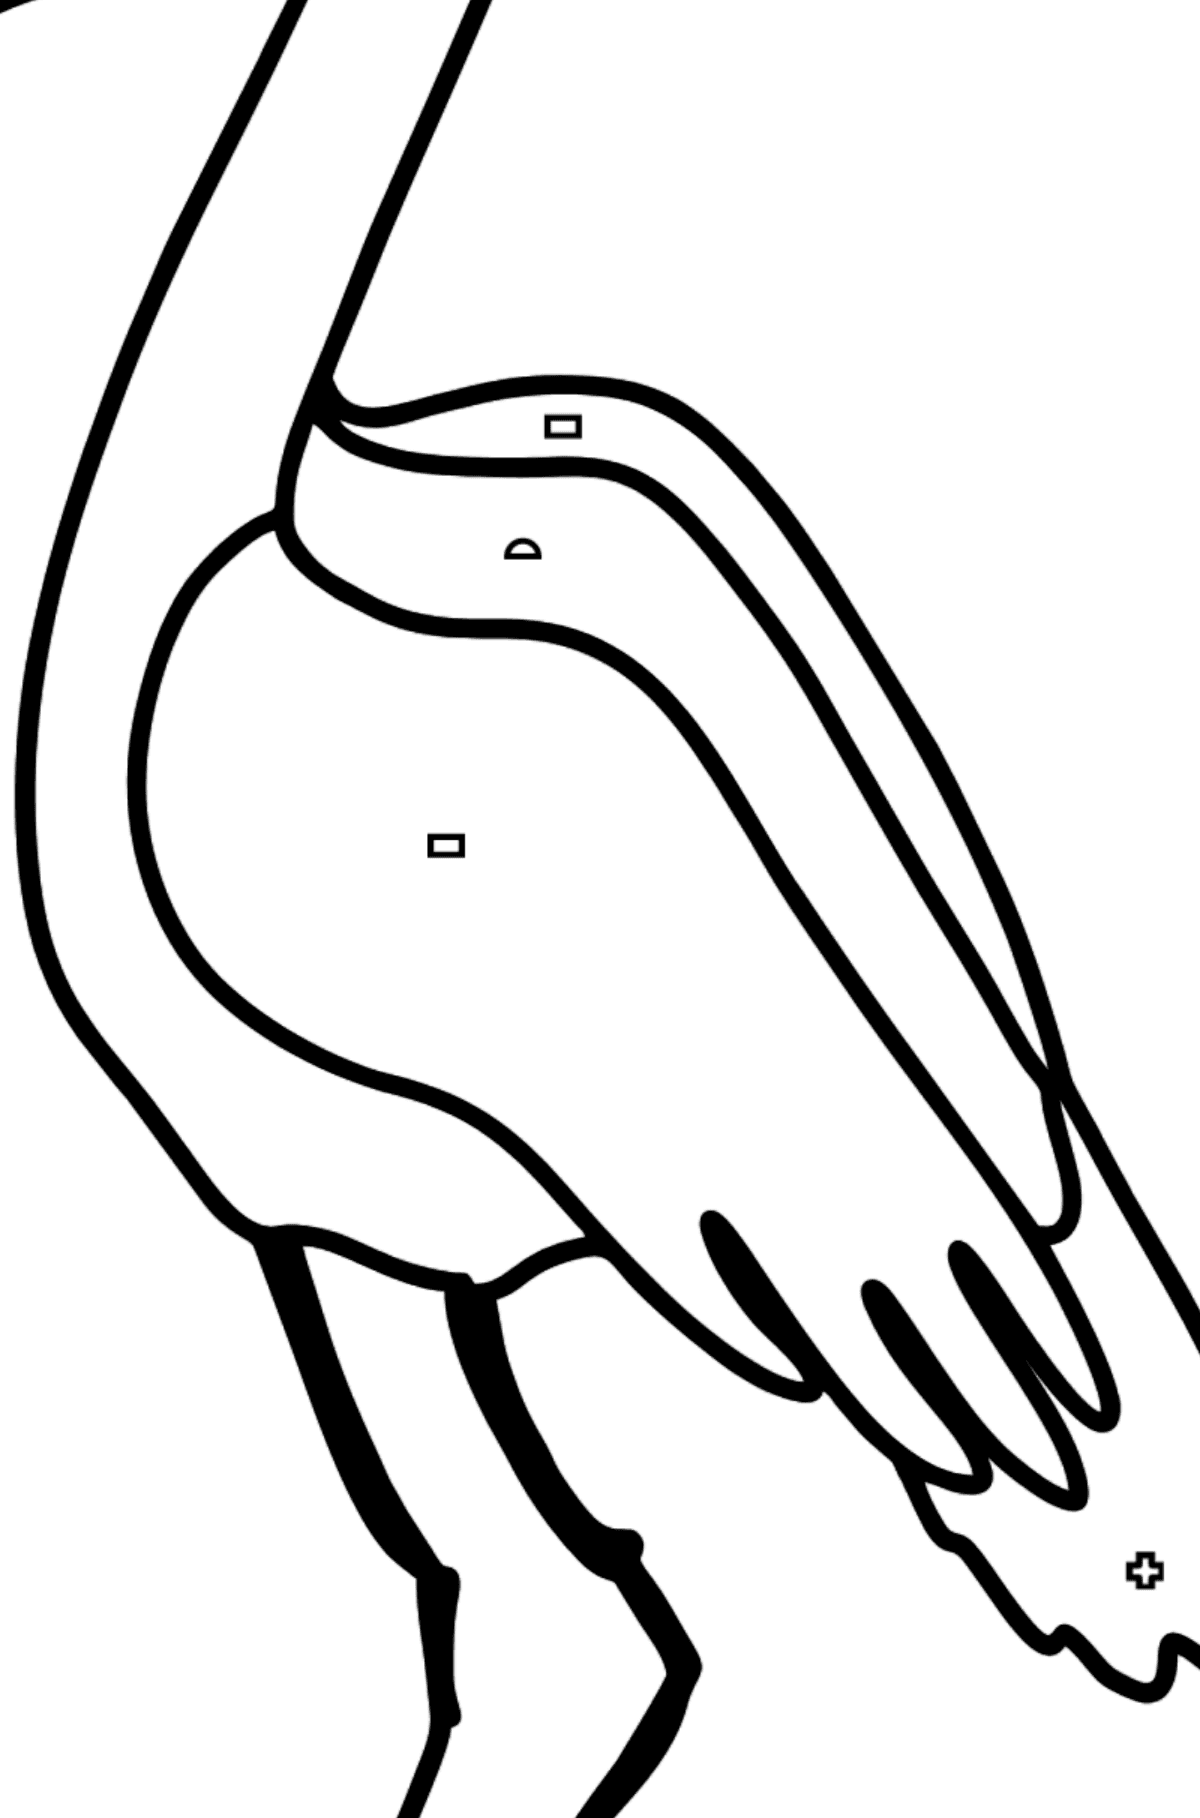 Simple coloring page with a stork  - Coloring by Geometric Shapes for Kids